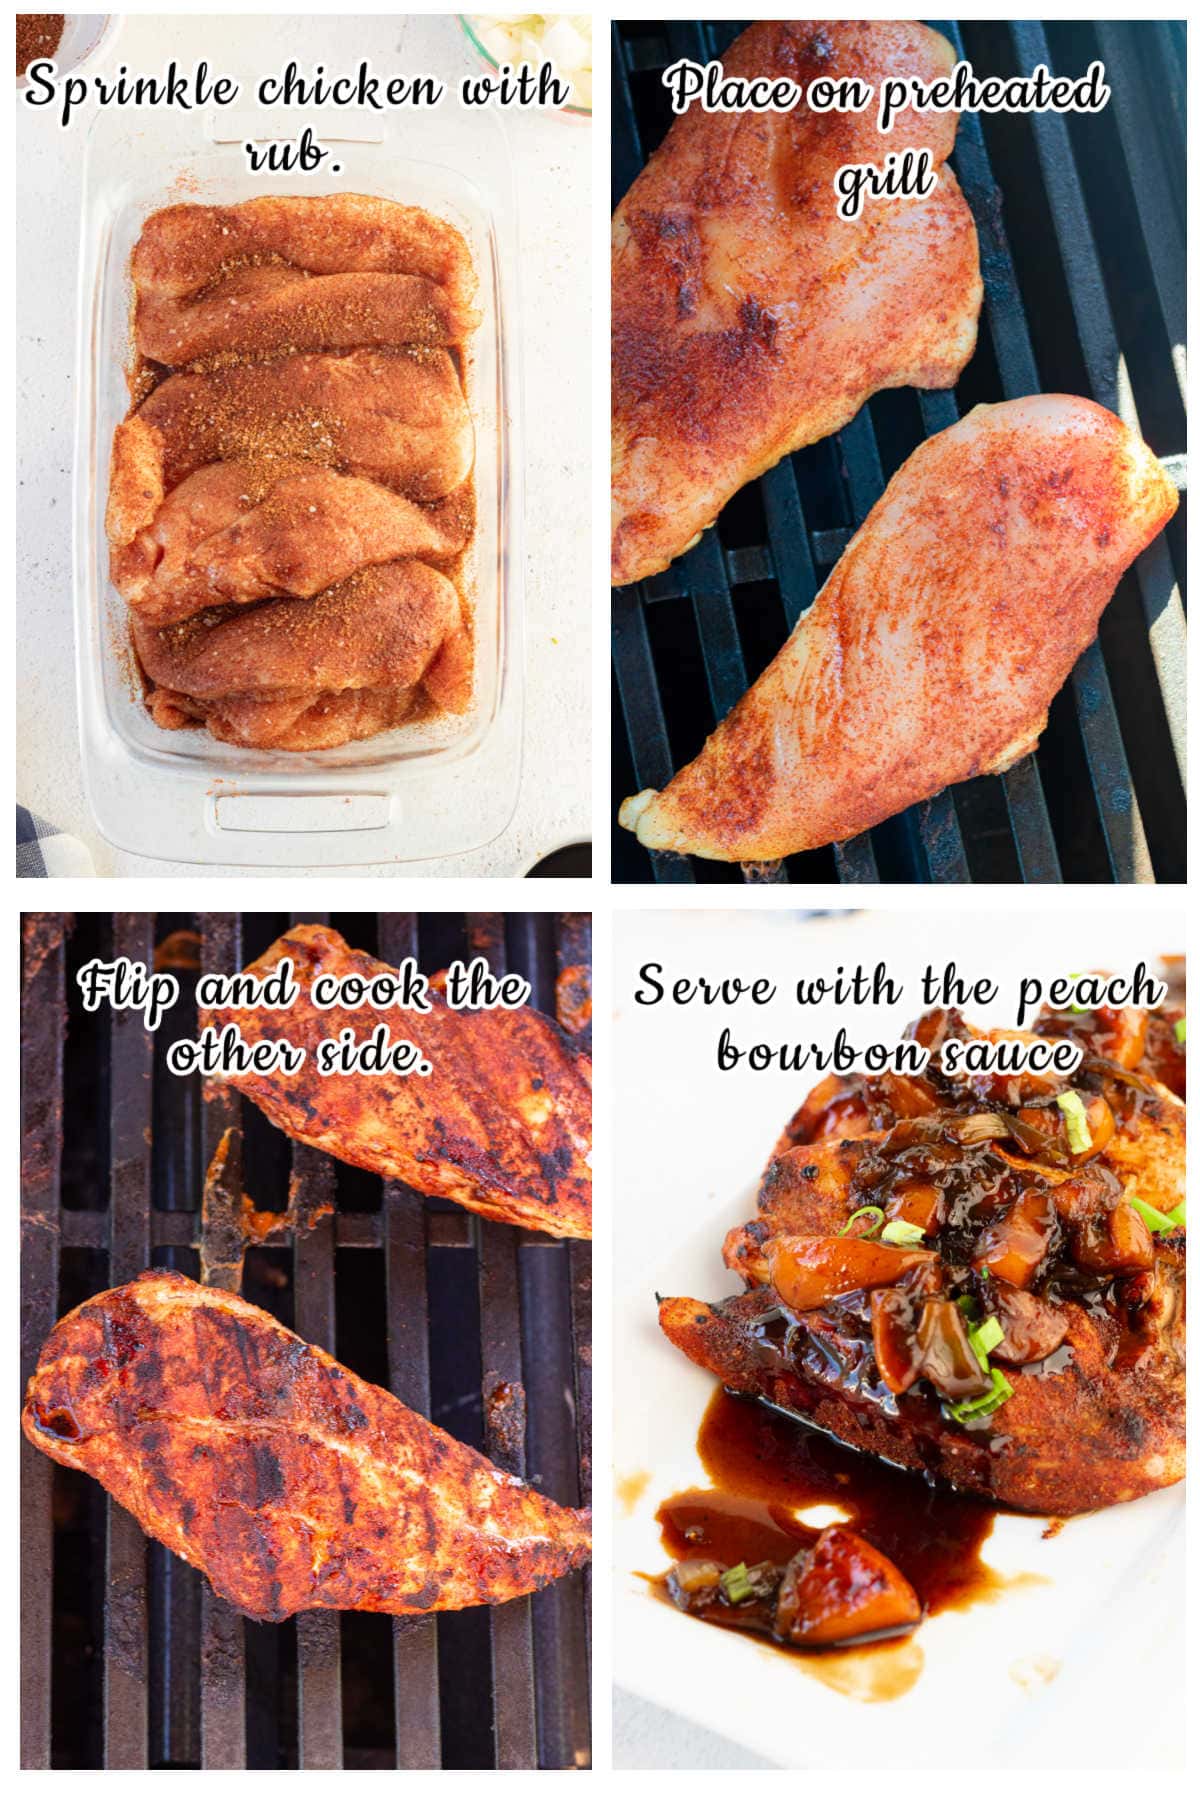 Step by step images showing how to grill the chicken.